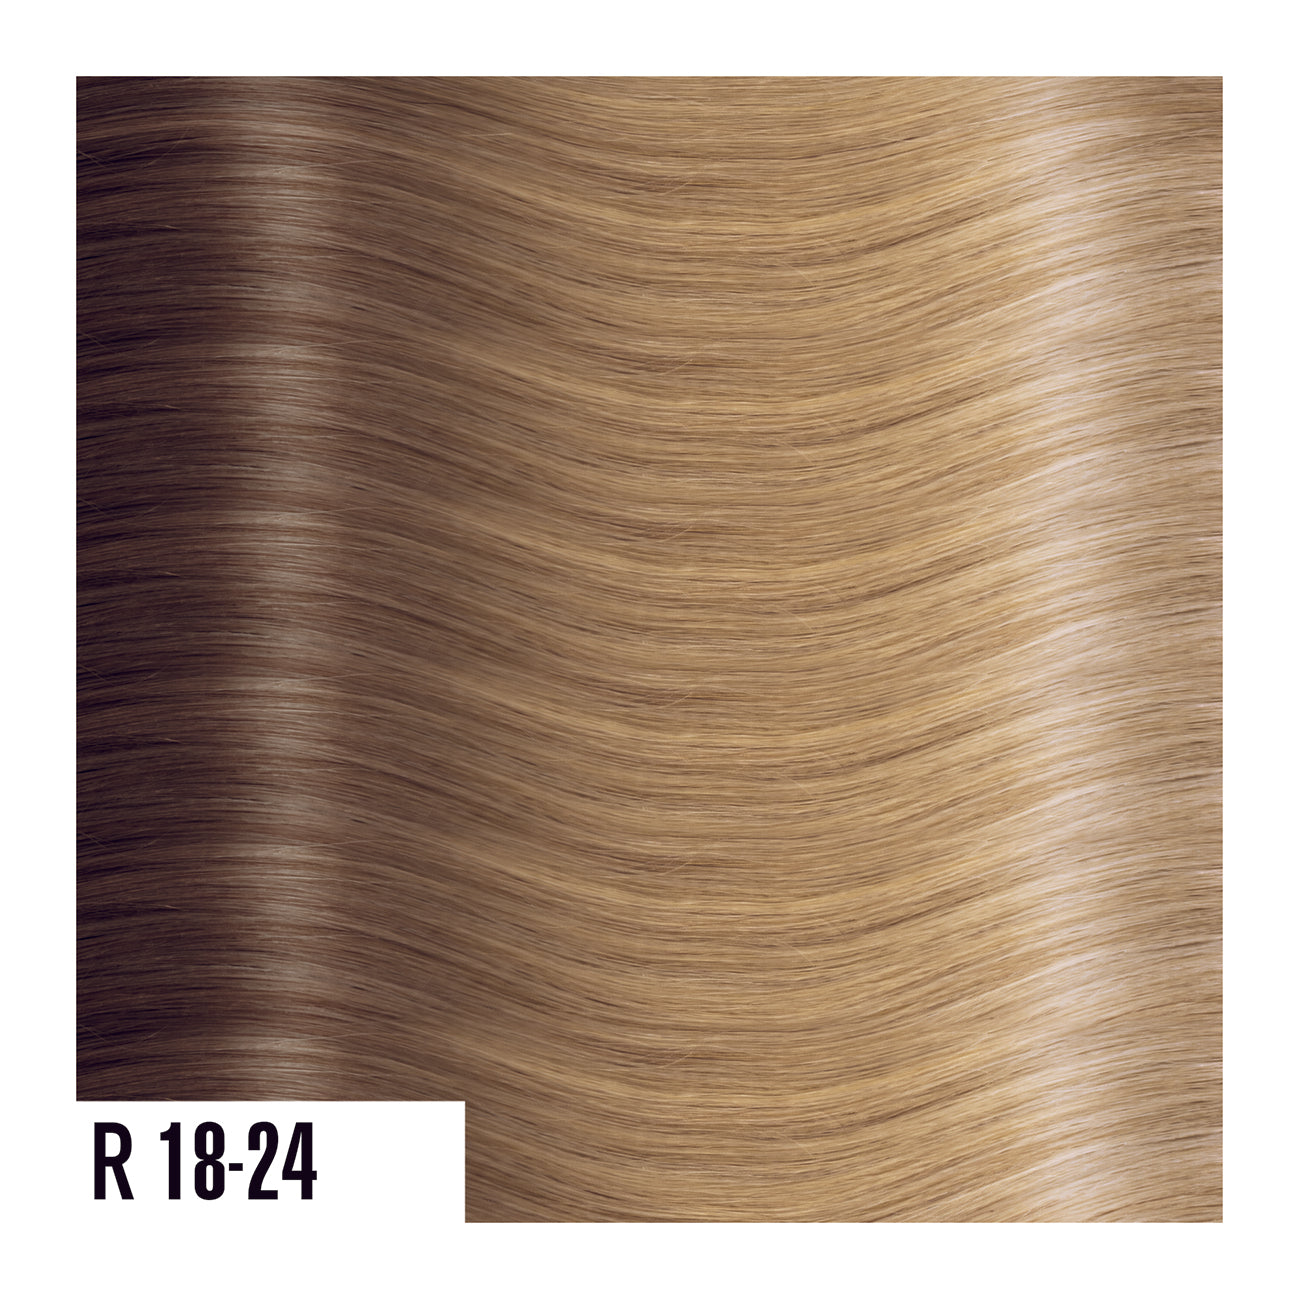 R18-24 - Rooted Prime Tape In Light Brown Fade Into Light Warm Blonde -Ombre colors are a beautiful gradual blend of 3 colors with darker roots and lighter ends.  